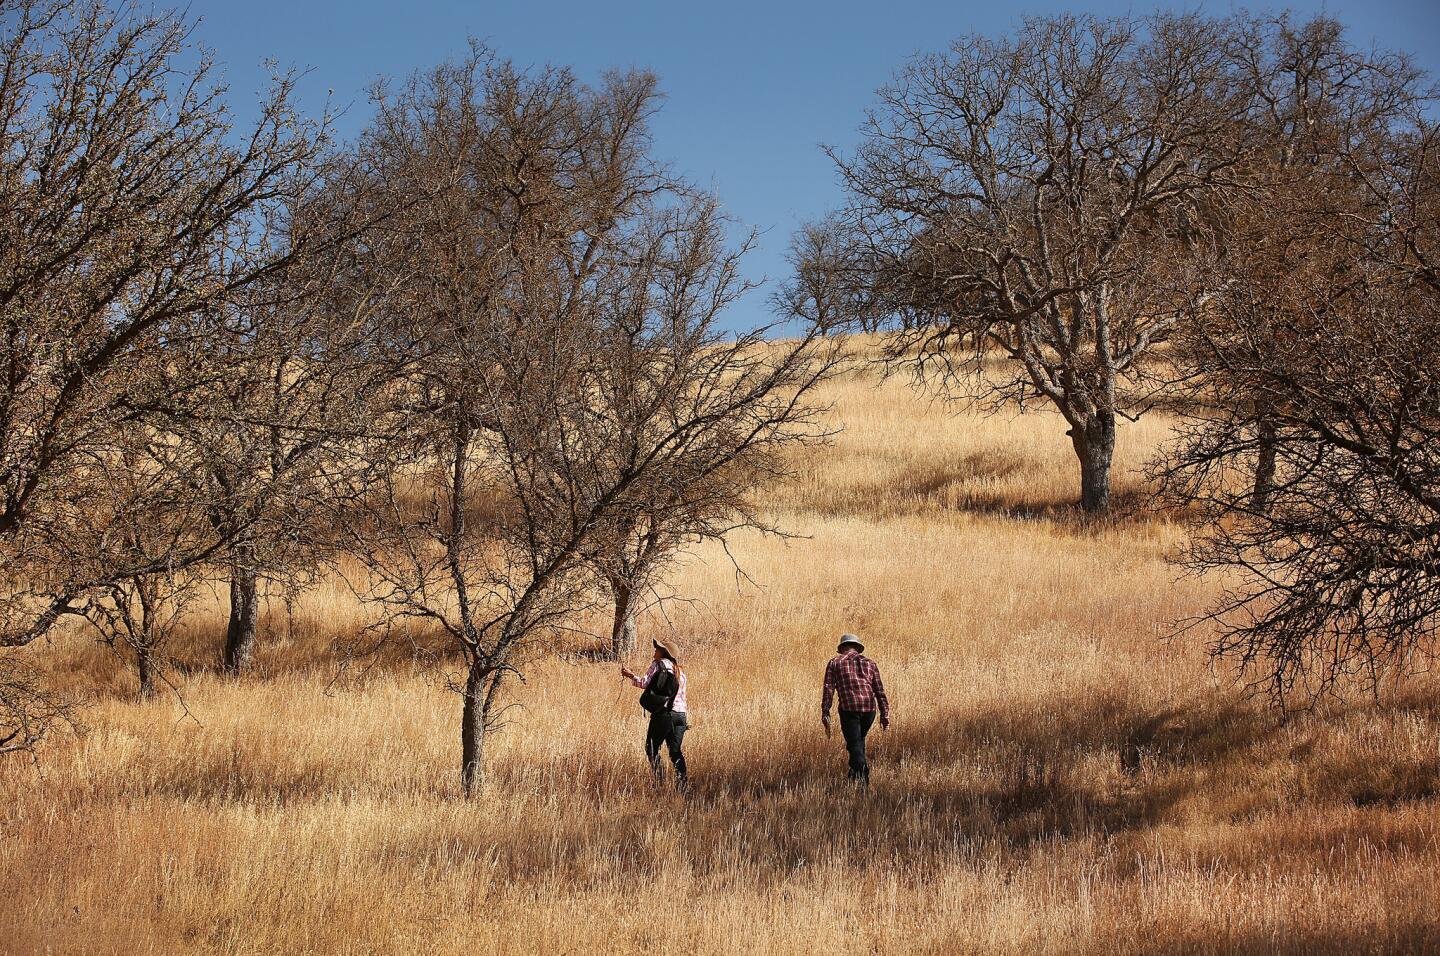 Researcher Blair McLaughlin, left, and Andrew Weitz walk through oak trees on Canyon Ranch near Shandon. The two are studying effects of the drought.